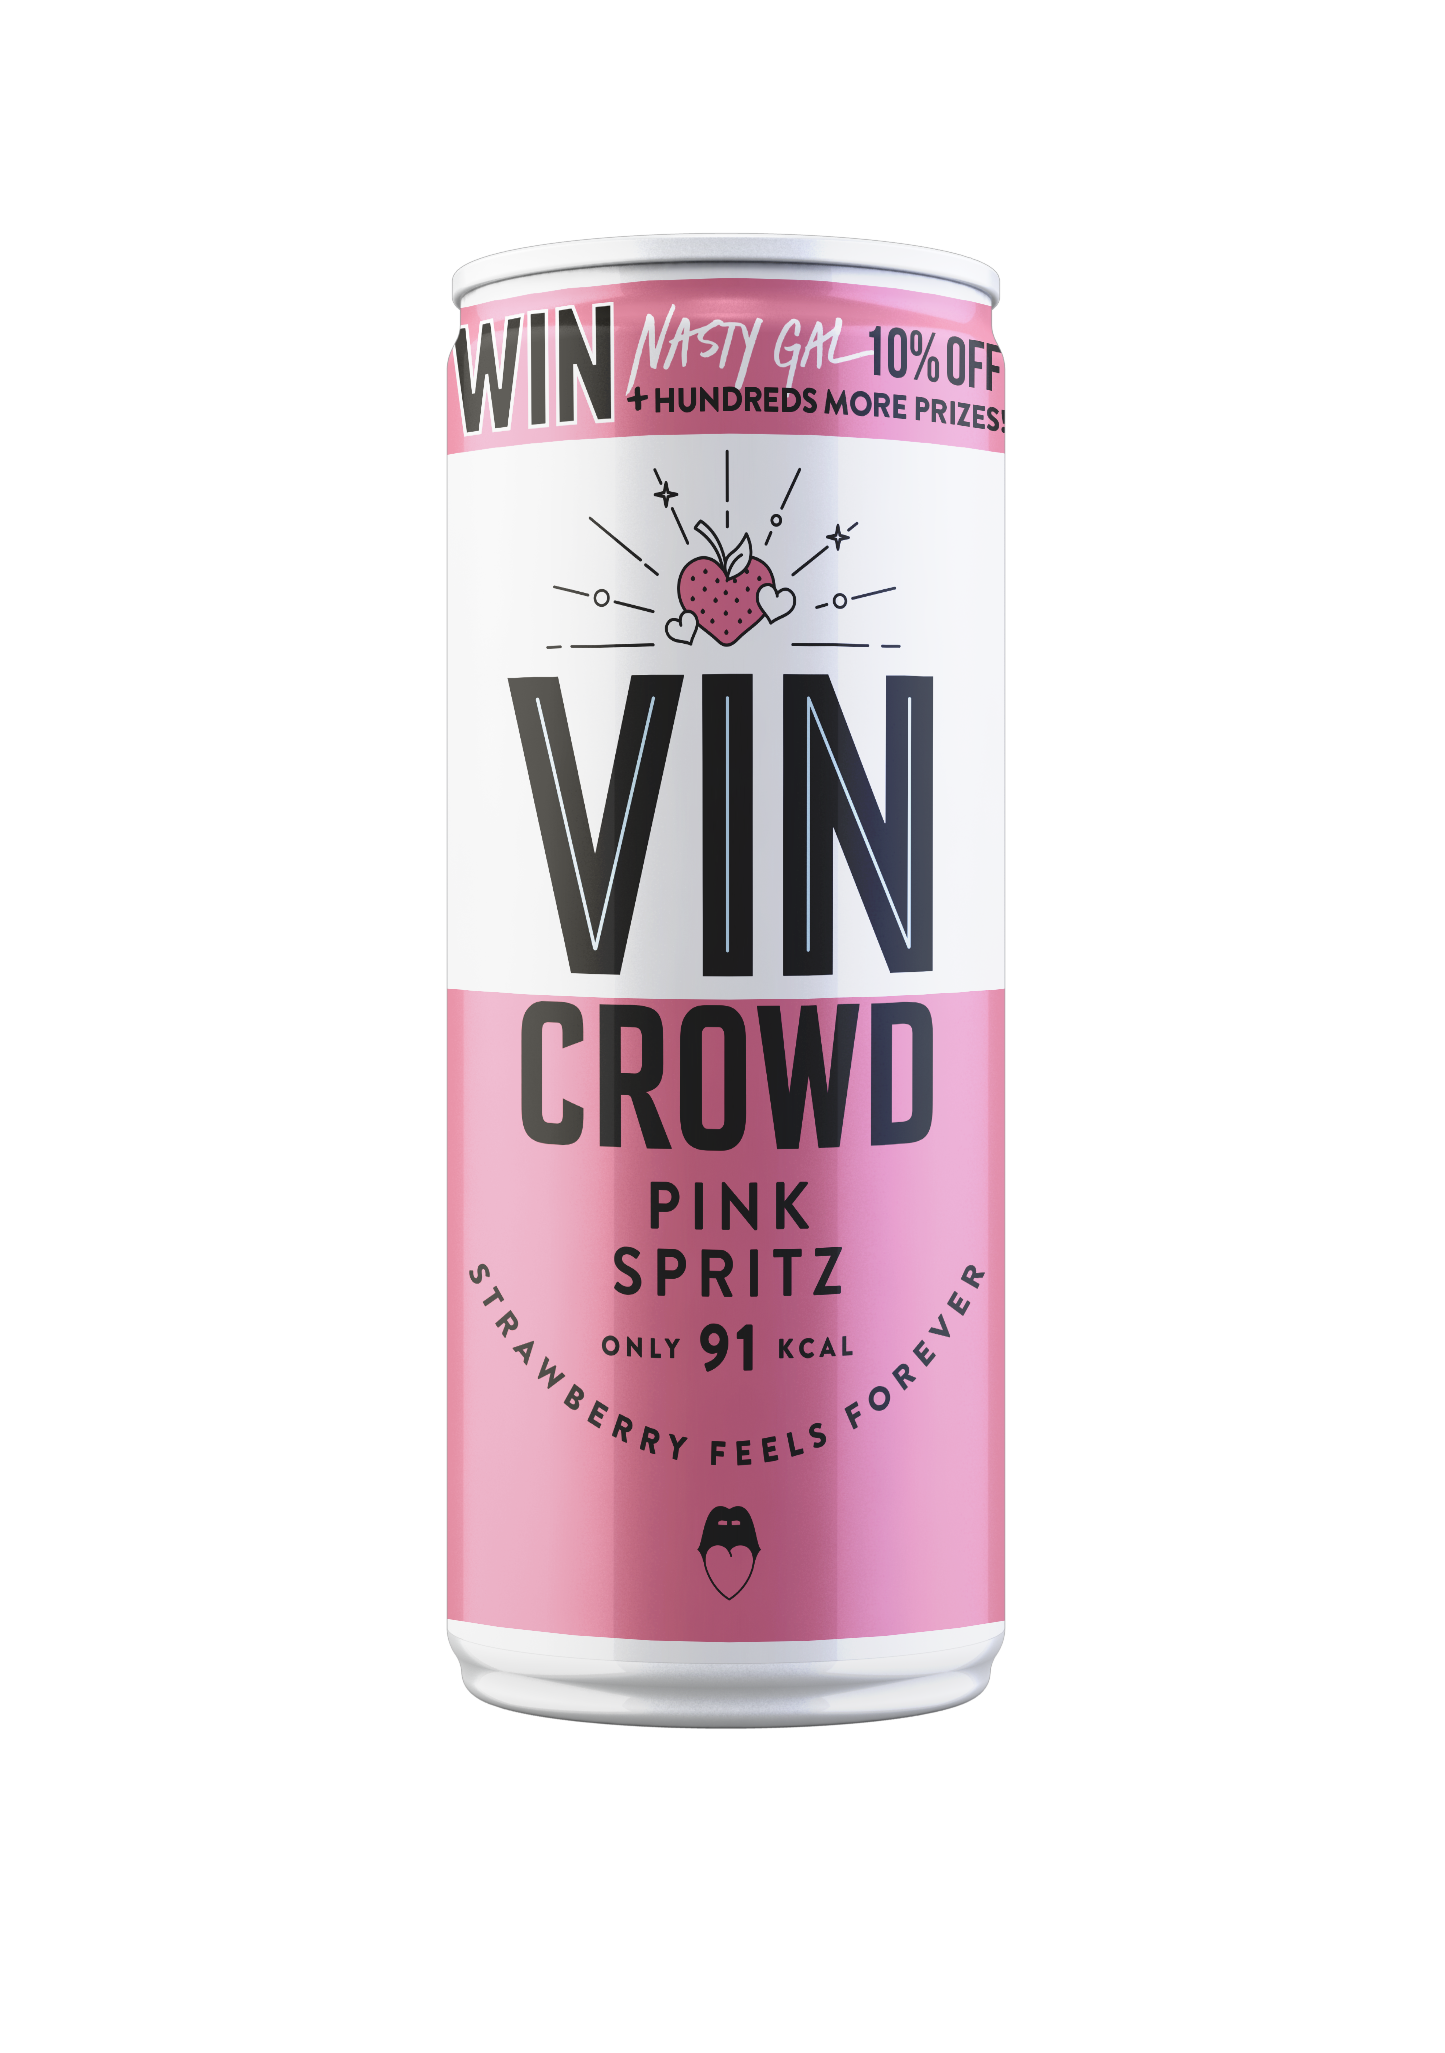 Drinks brand Vin Crowd announces collaboration with Nasty Gal